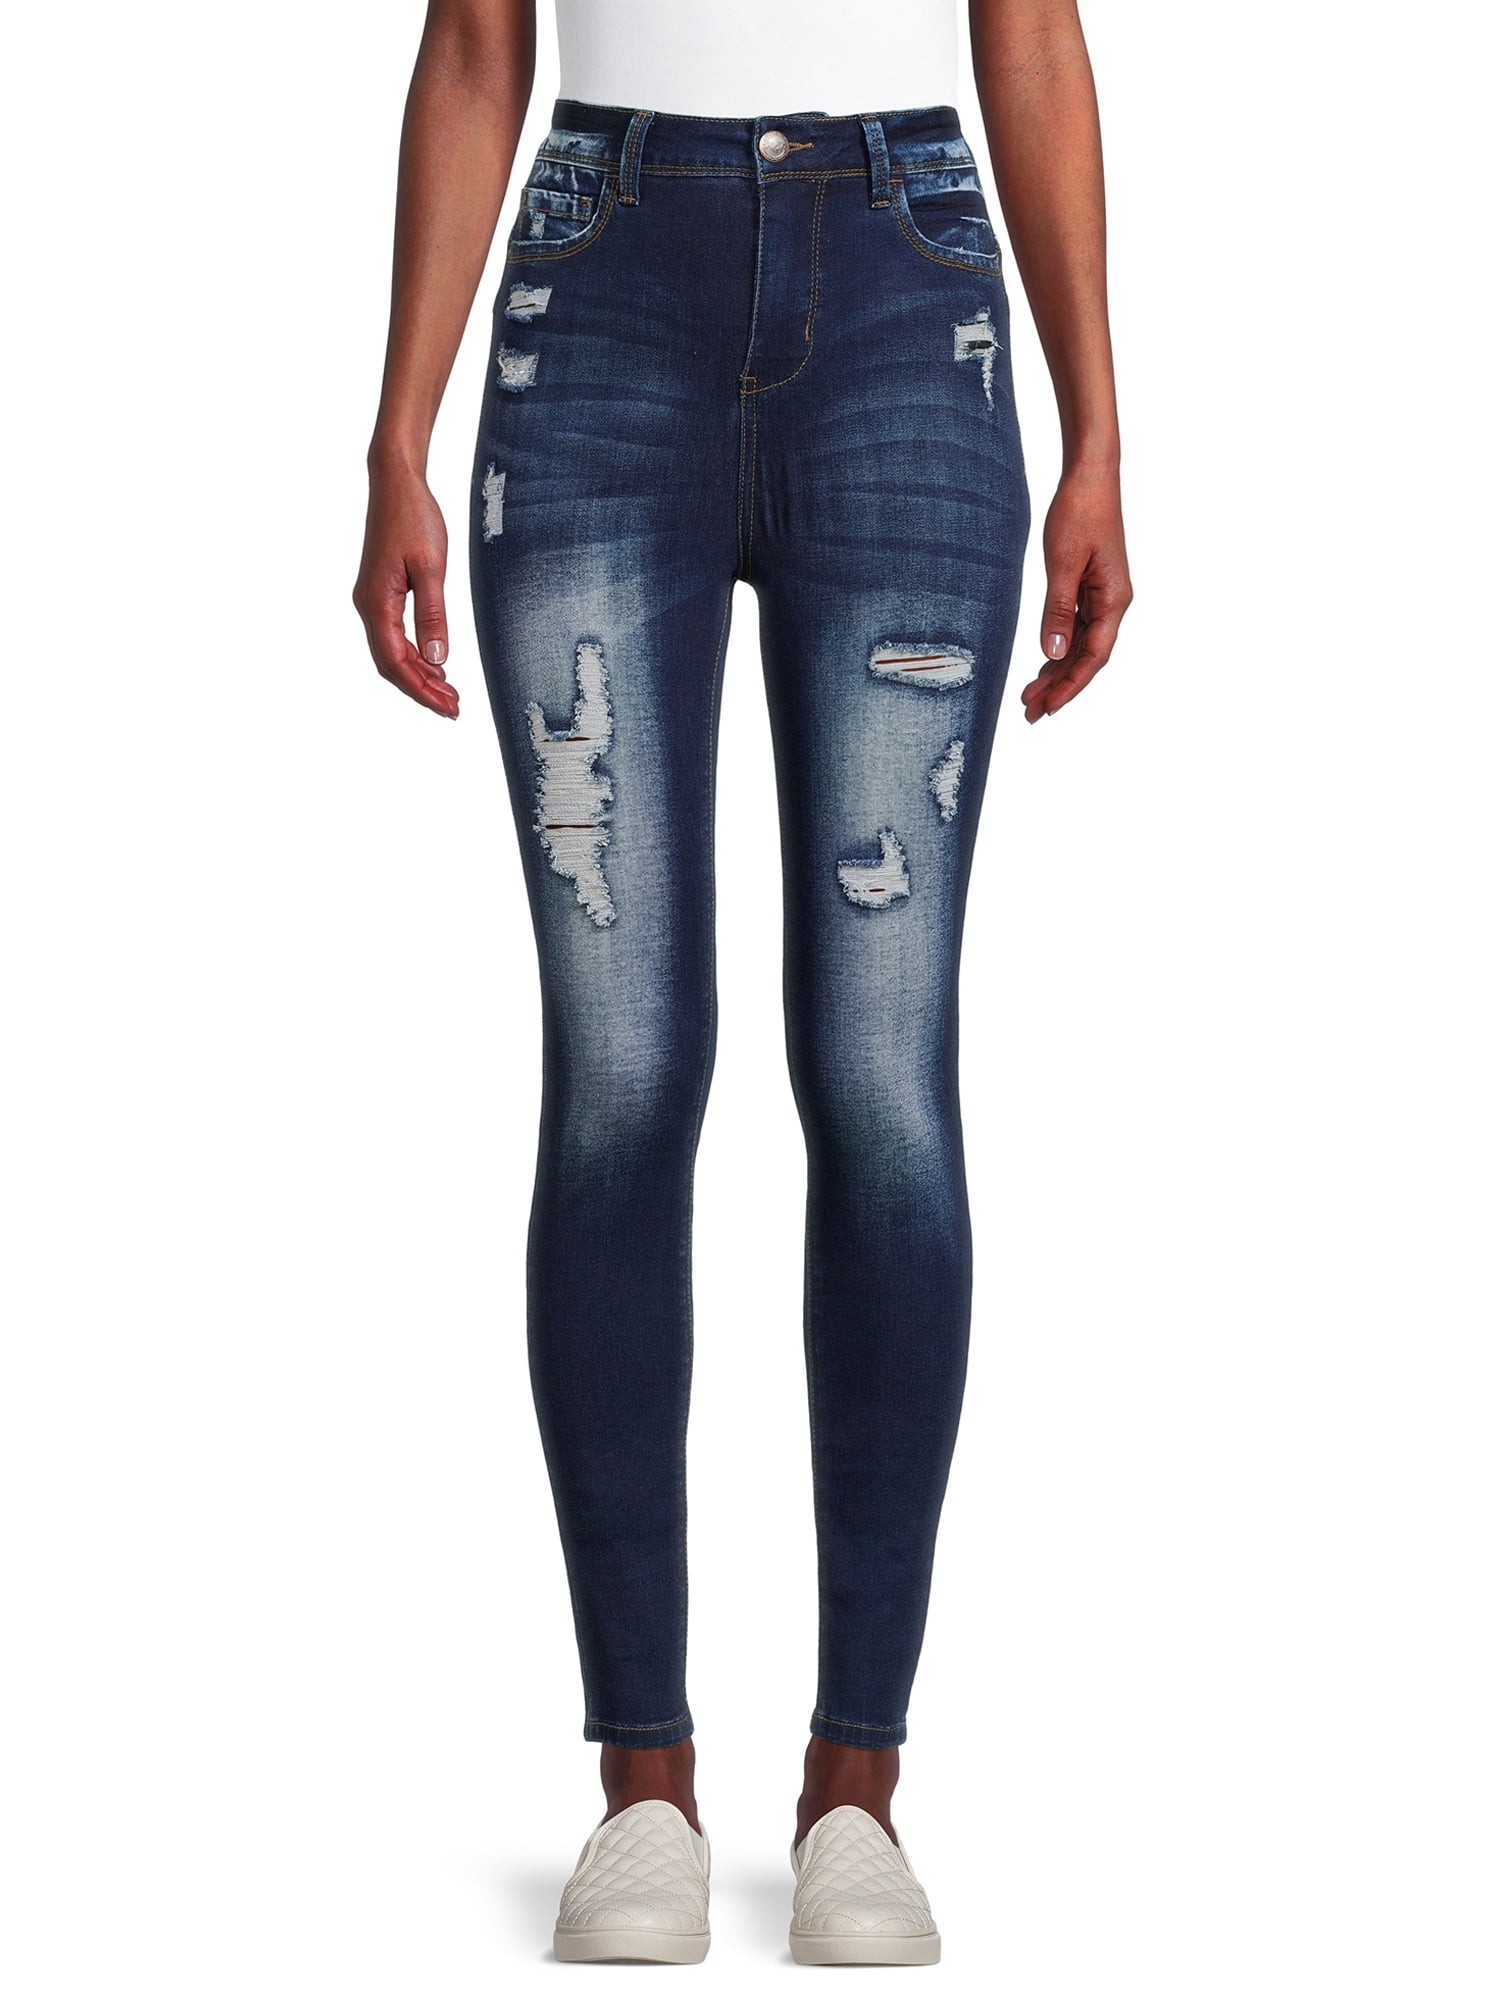 Harmony & Havoc Women's Contour and Lift High Rise Skinny Jeans ...